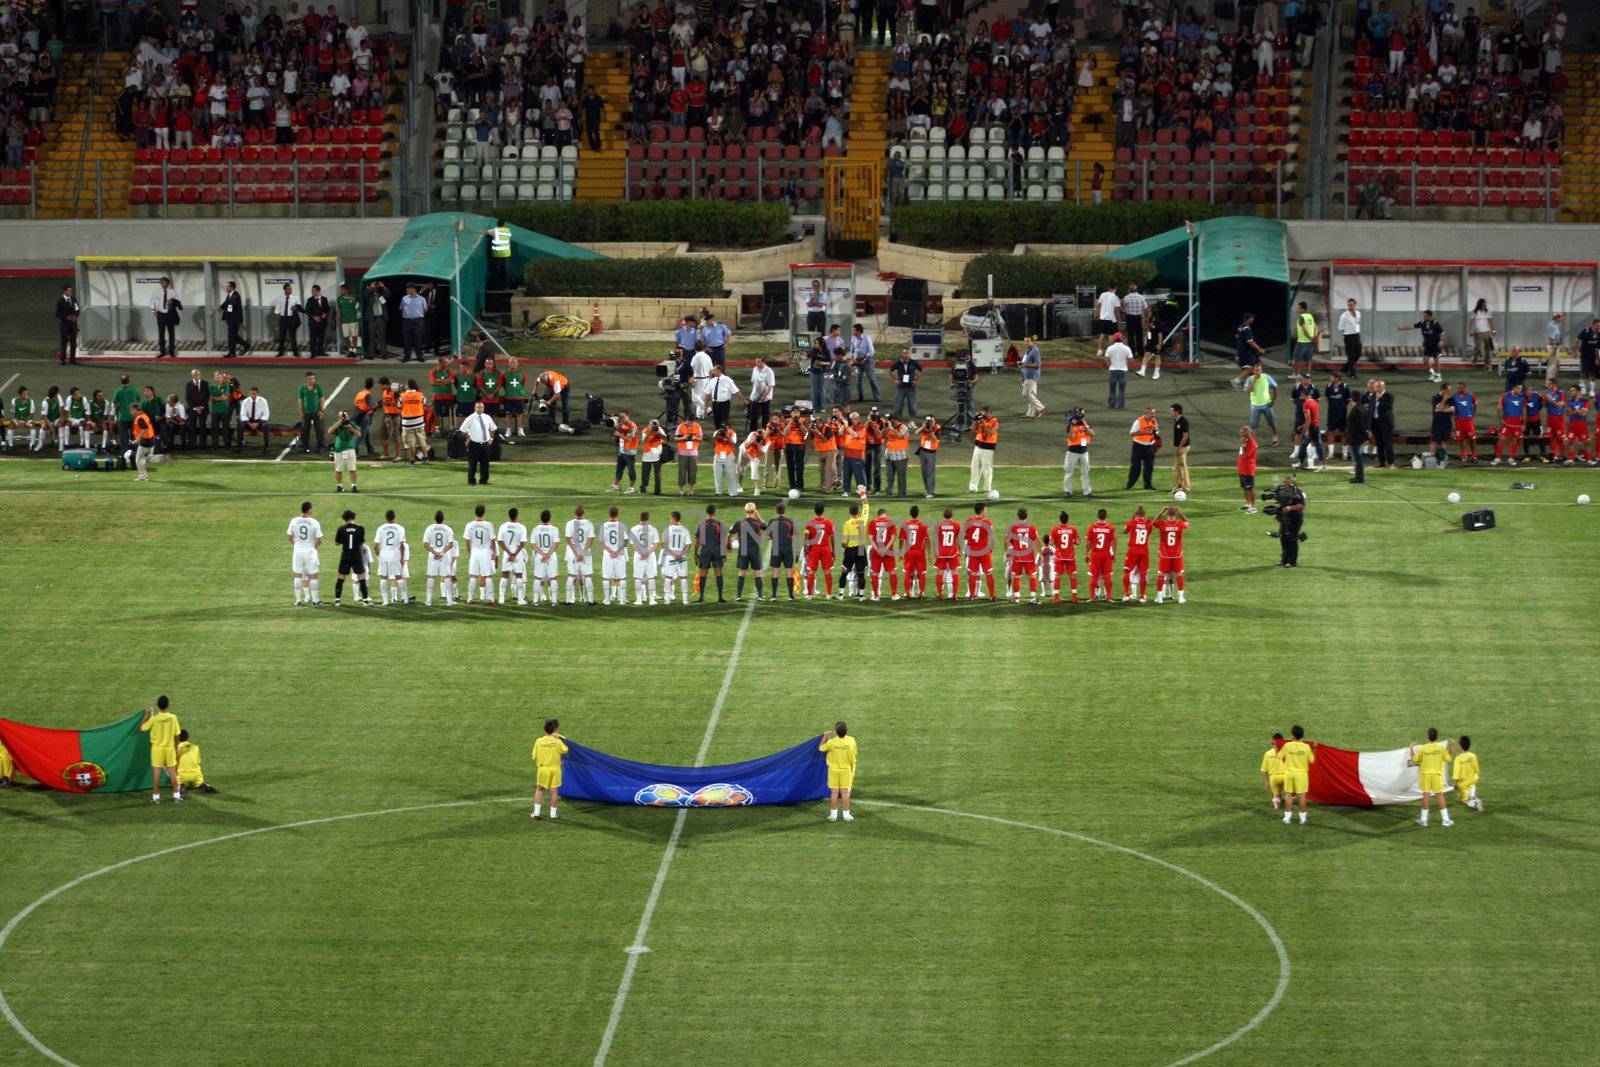 Portugal versus Malta FIFA World Cup Qualifier, South Africa, 2010 by keki